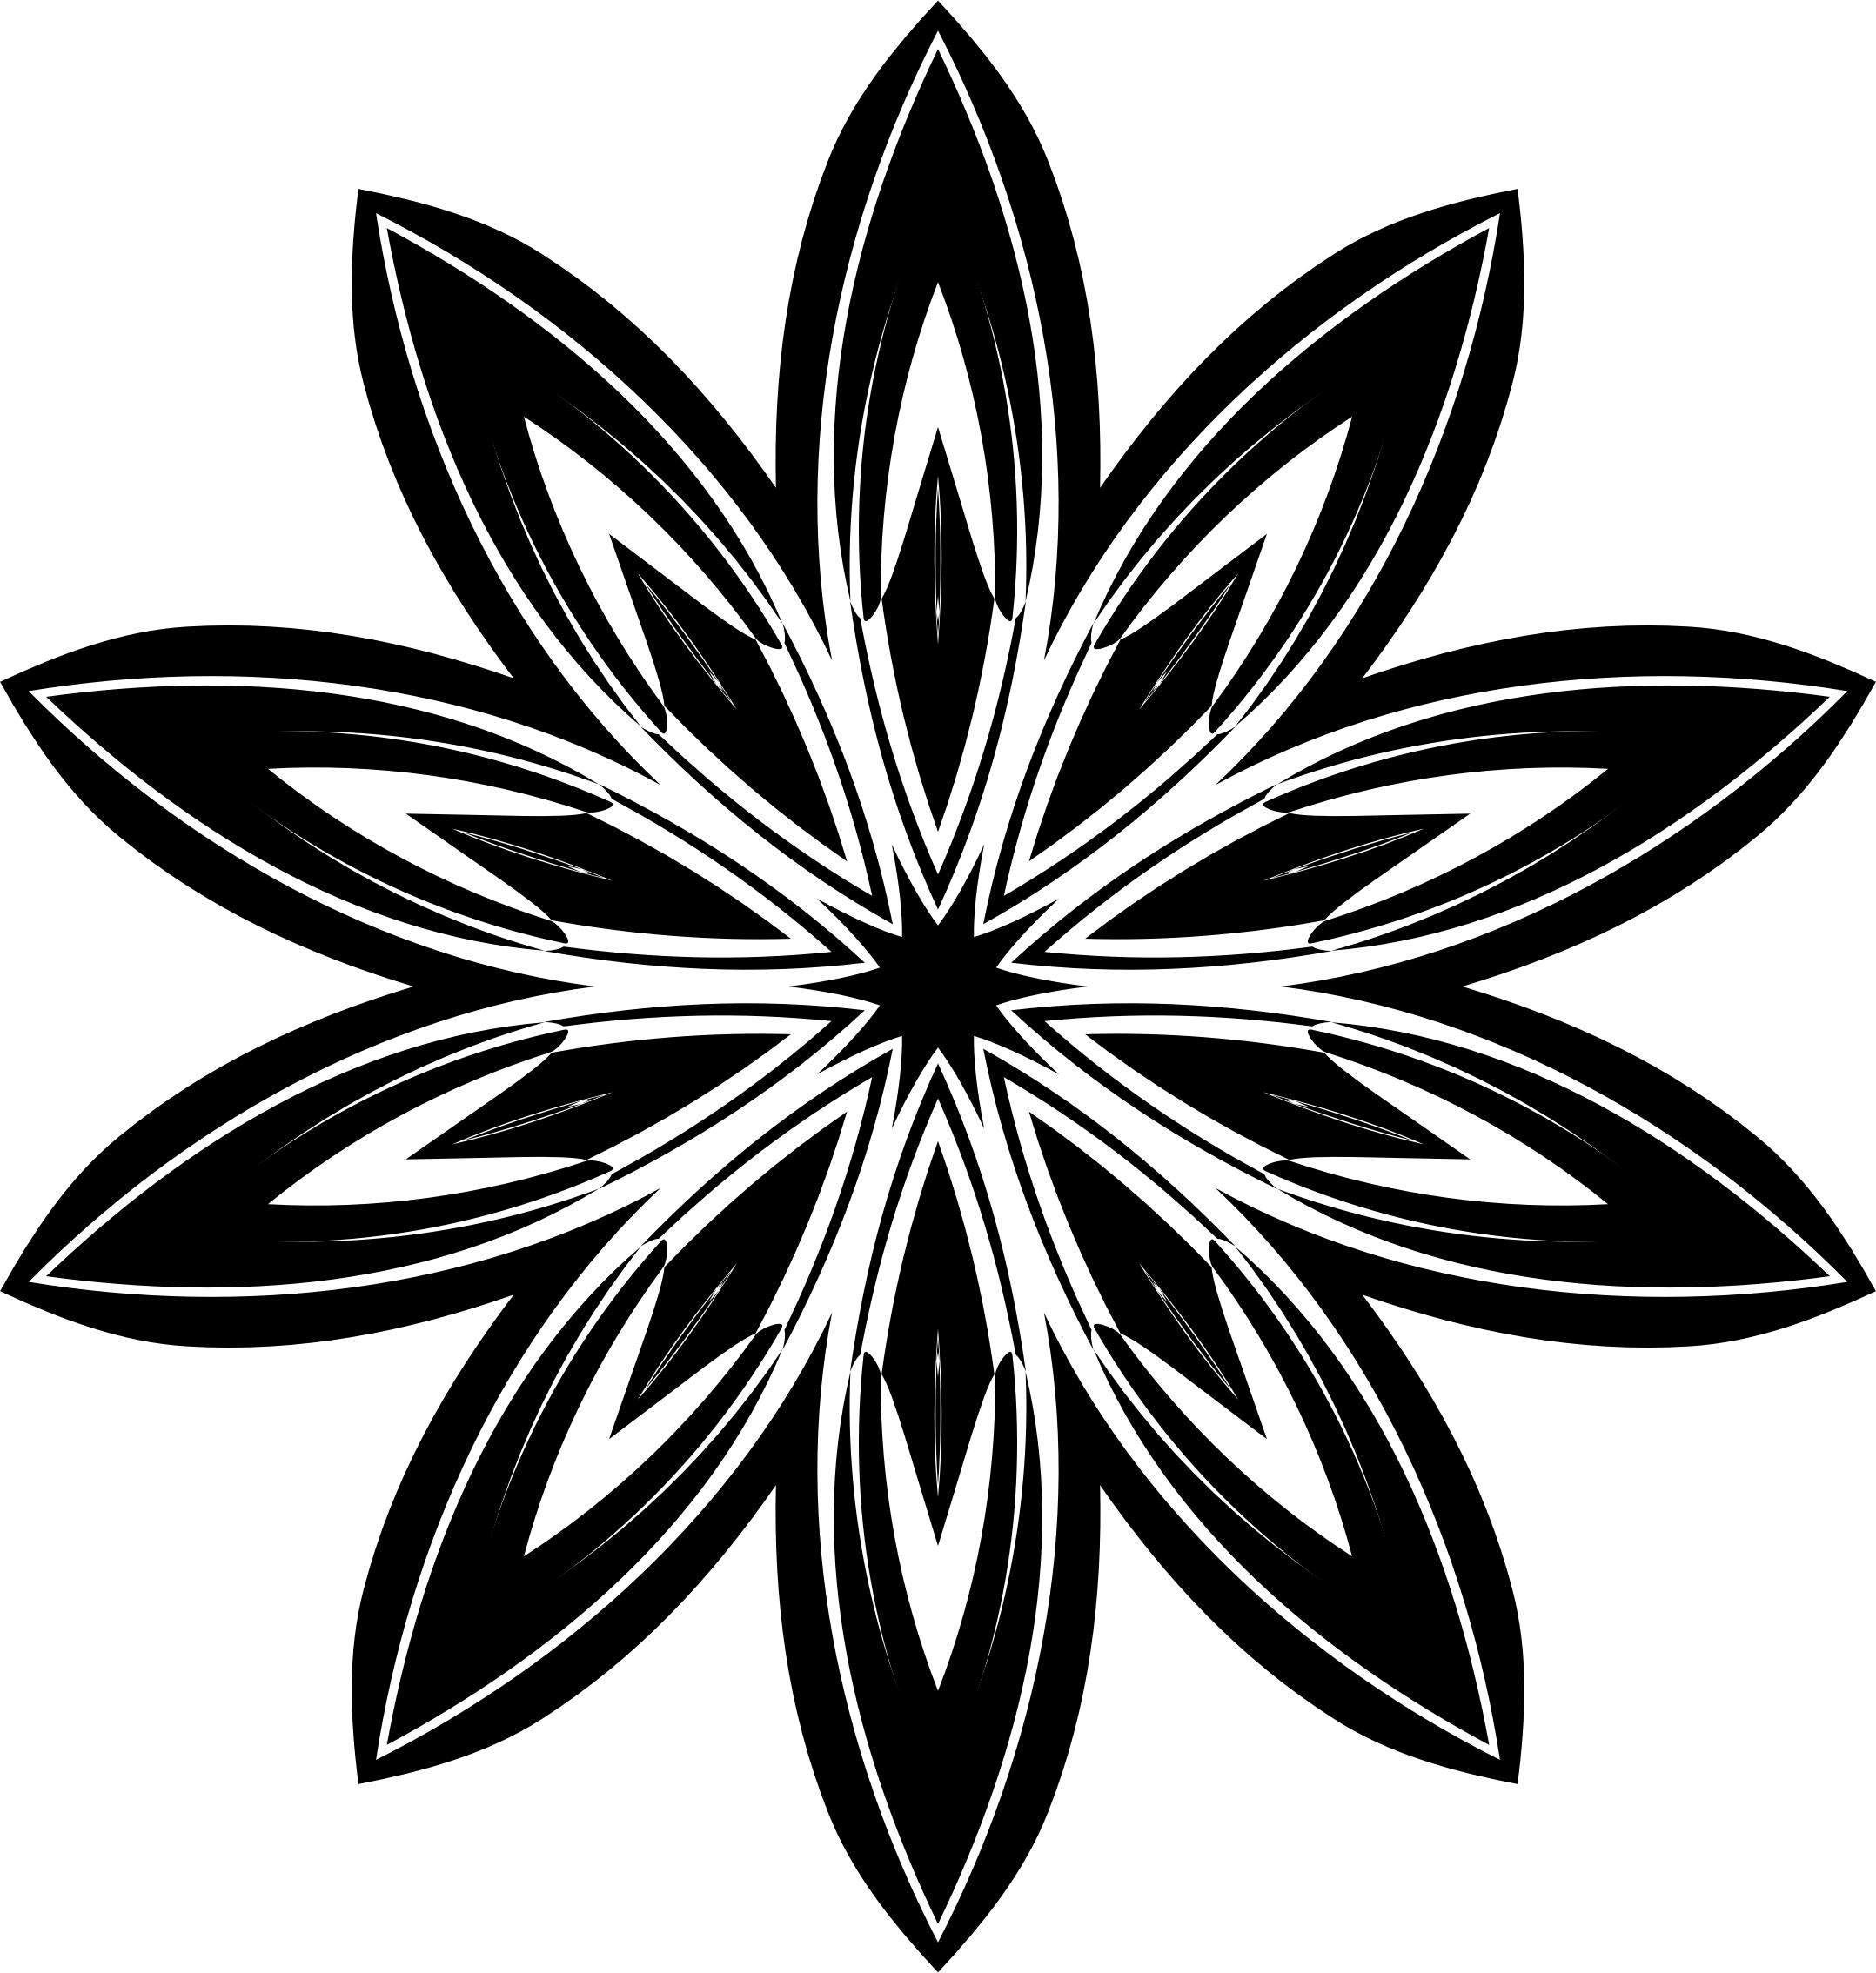 Arbitrary Flower Silhouette png